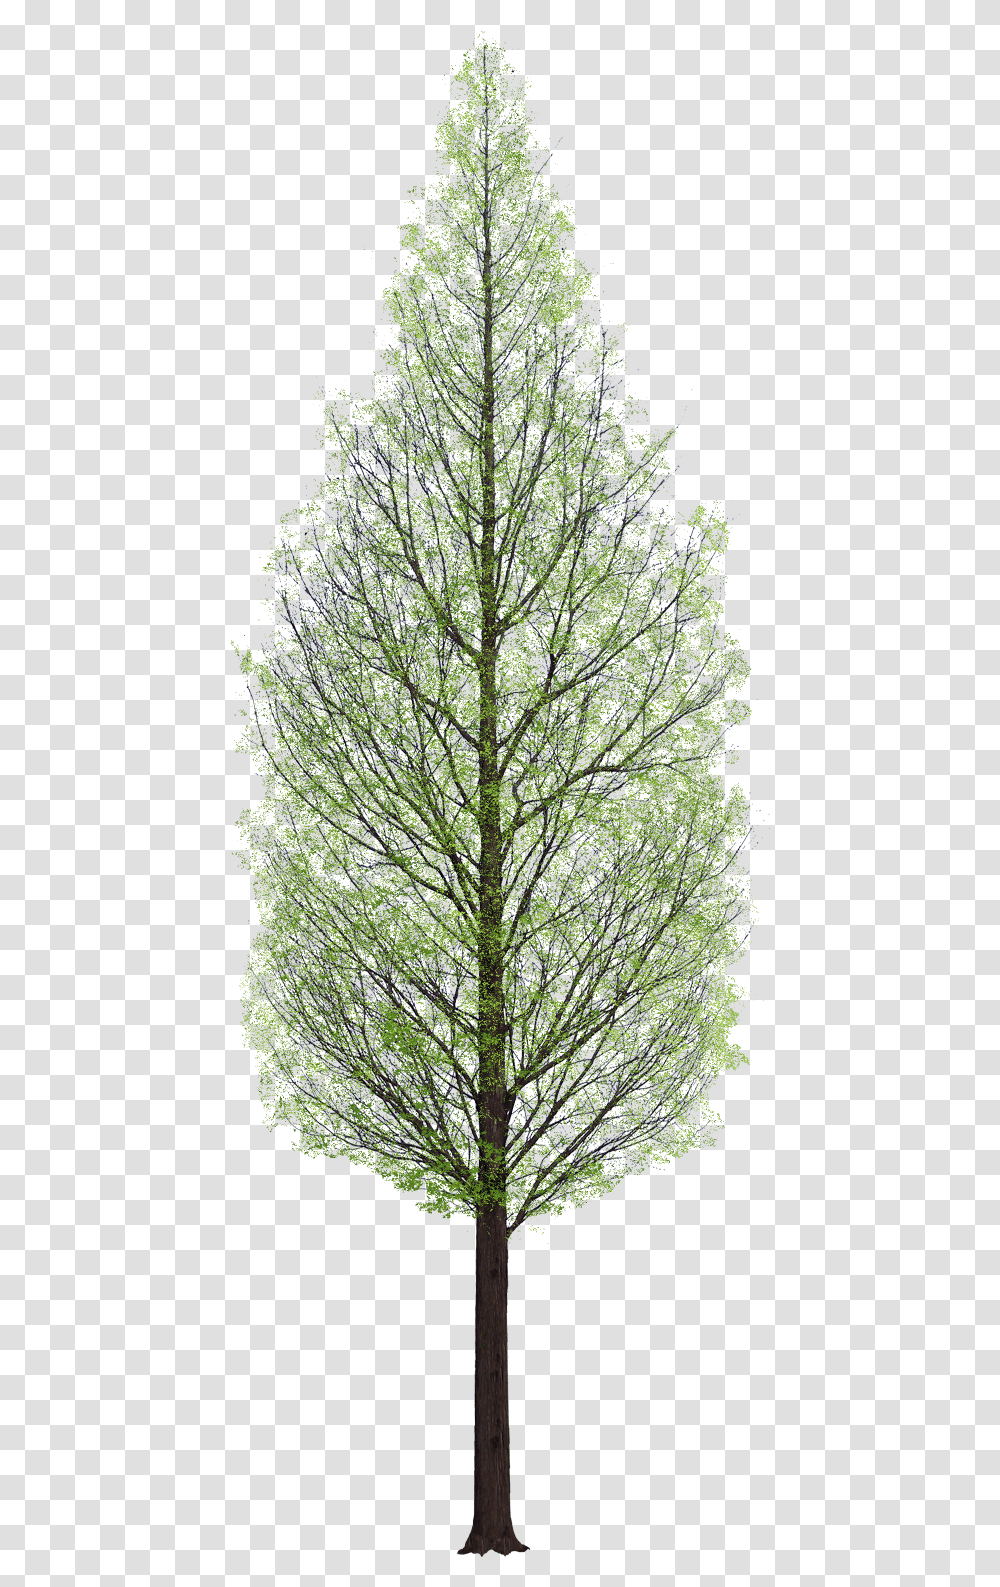 Pine Tree Architecture, Plant, Tree Trunk, Fir, Abies Transparent Png